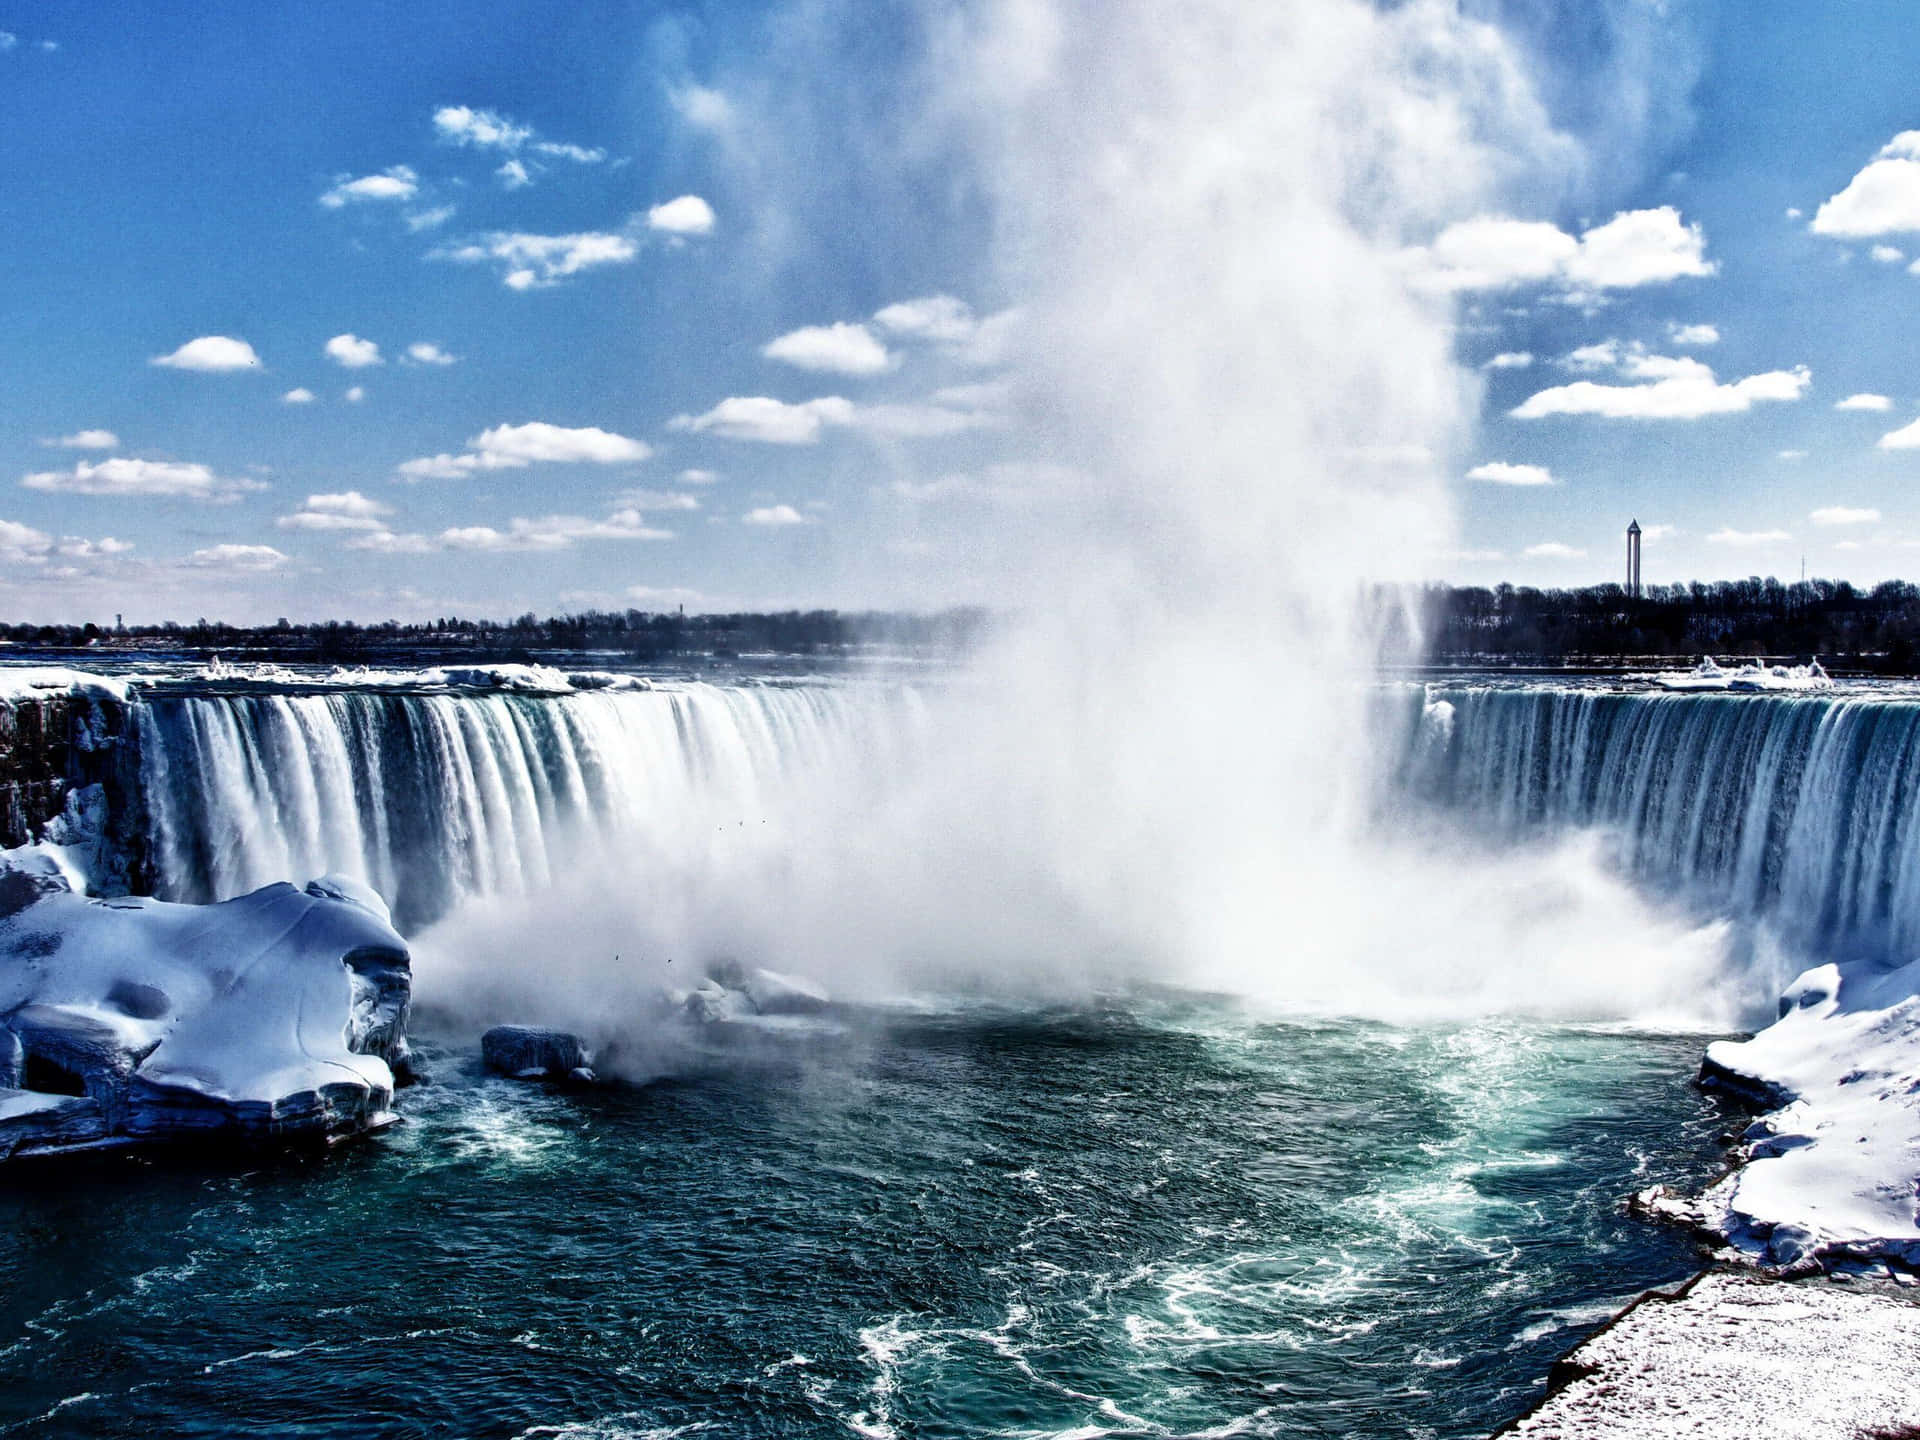 A stunning view of the magnificent Niagara Falls